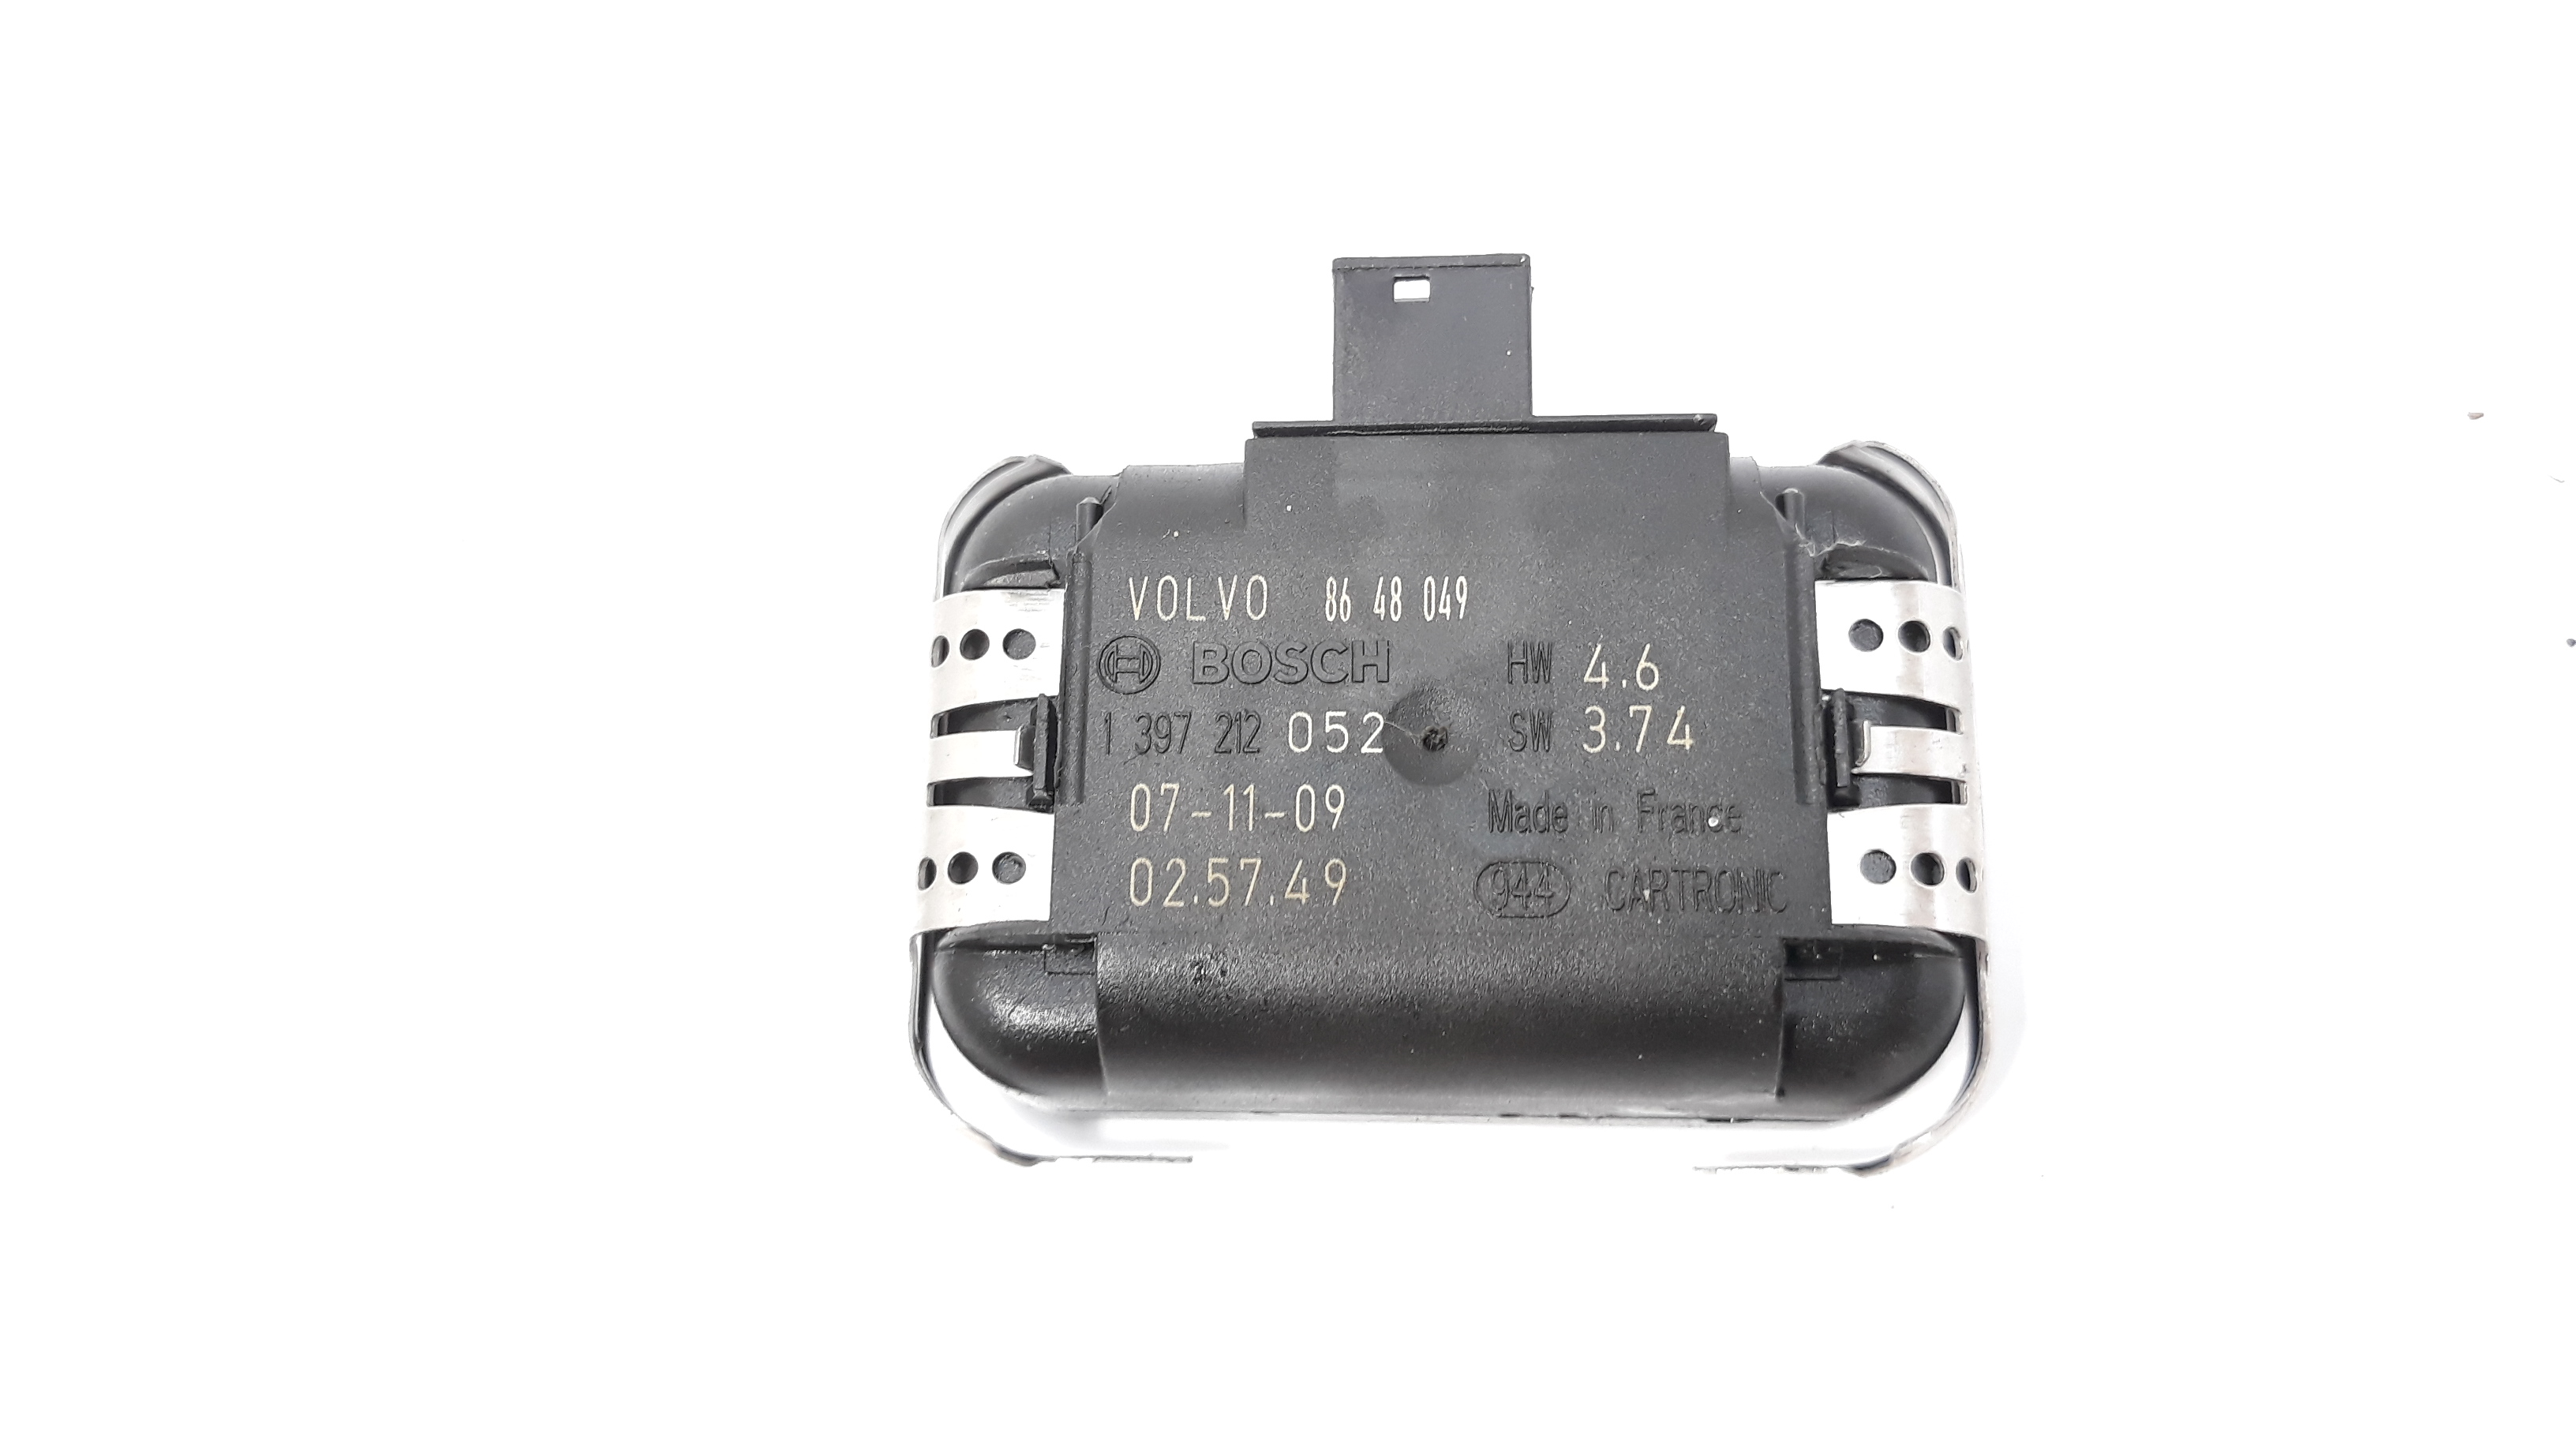 VOLVO C30 1 generation (2006-2013) Other Control Units 8648049 24031583